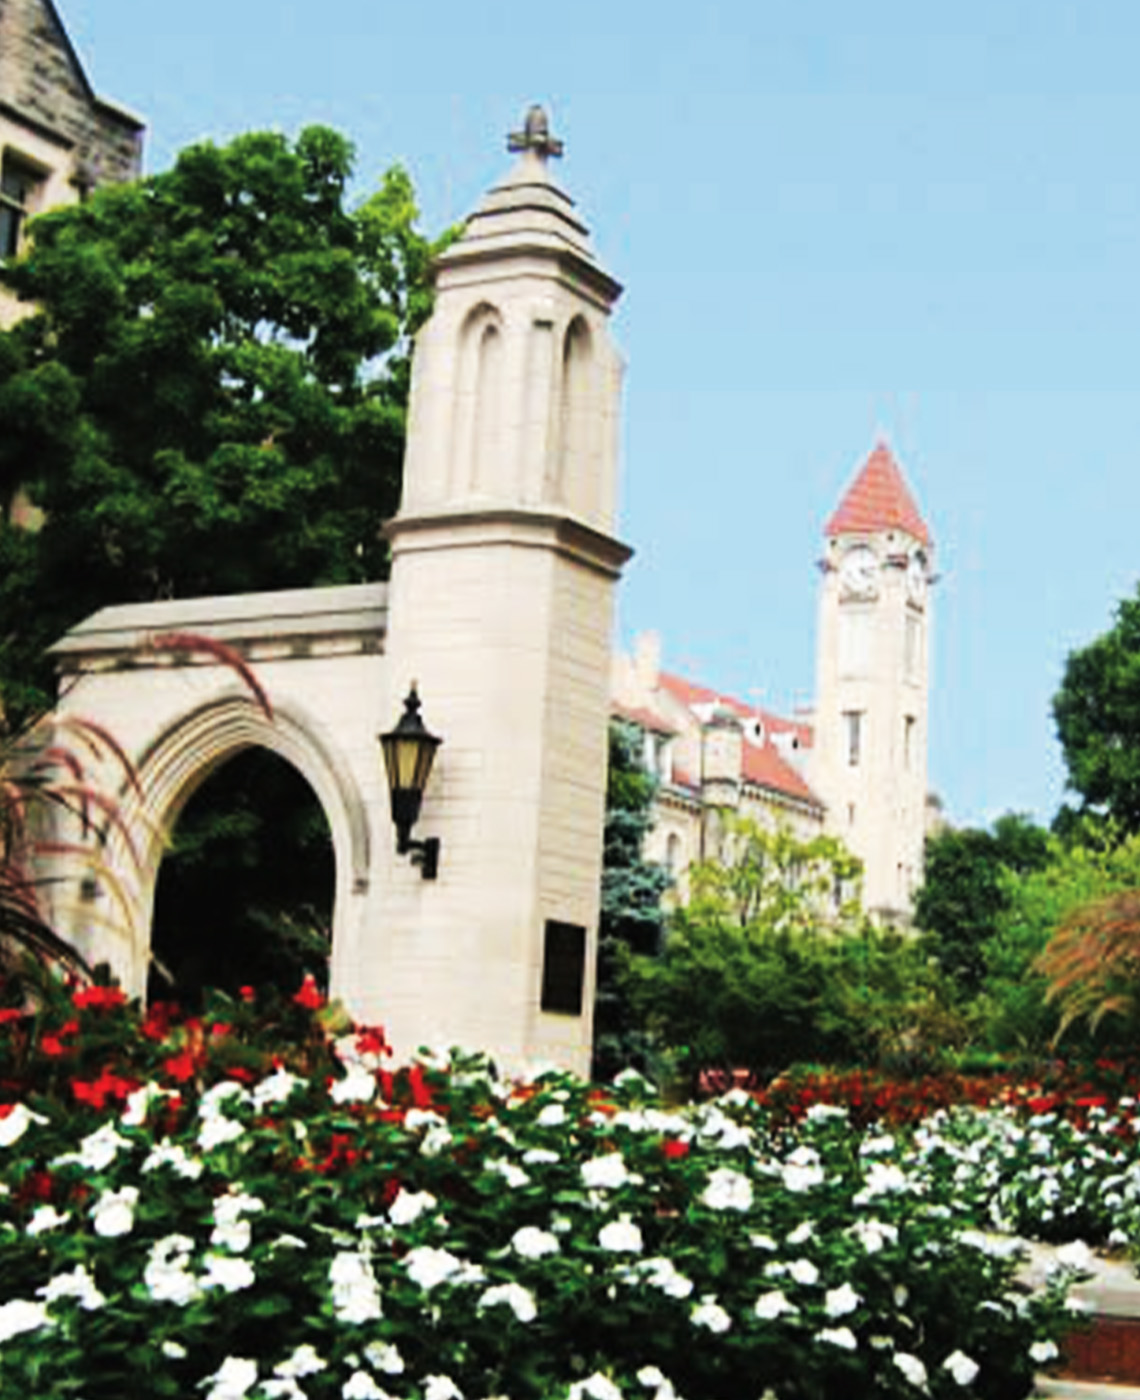 Indiana University sample gates during day time with a bed of white and red flowers in front